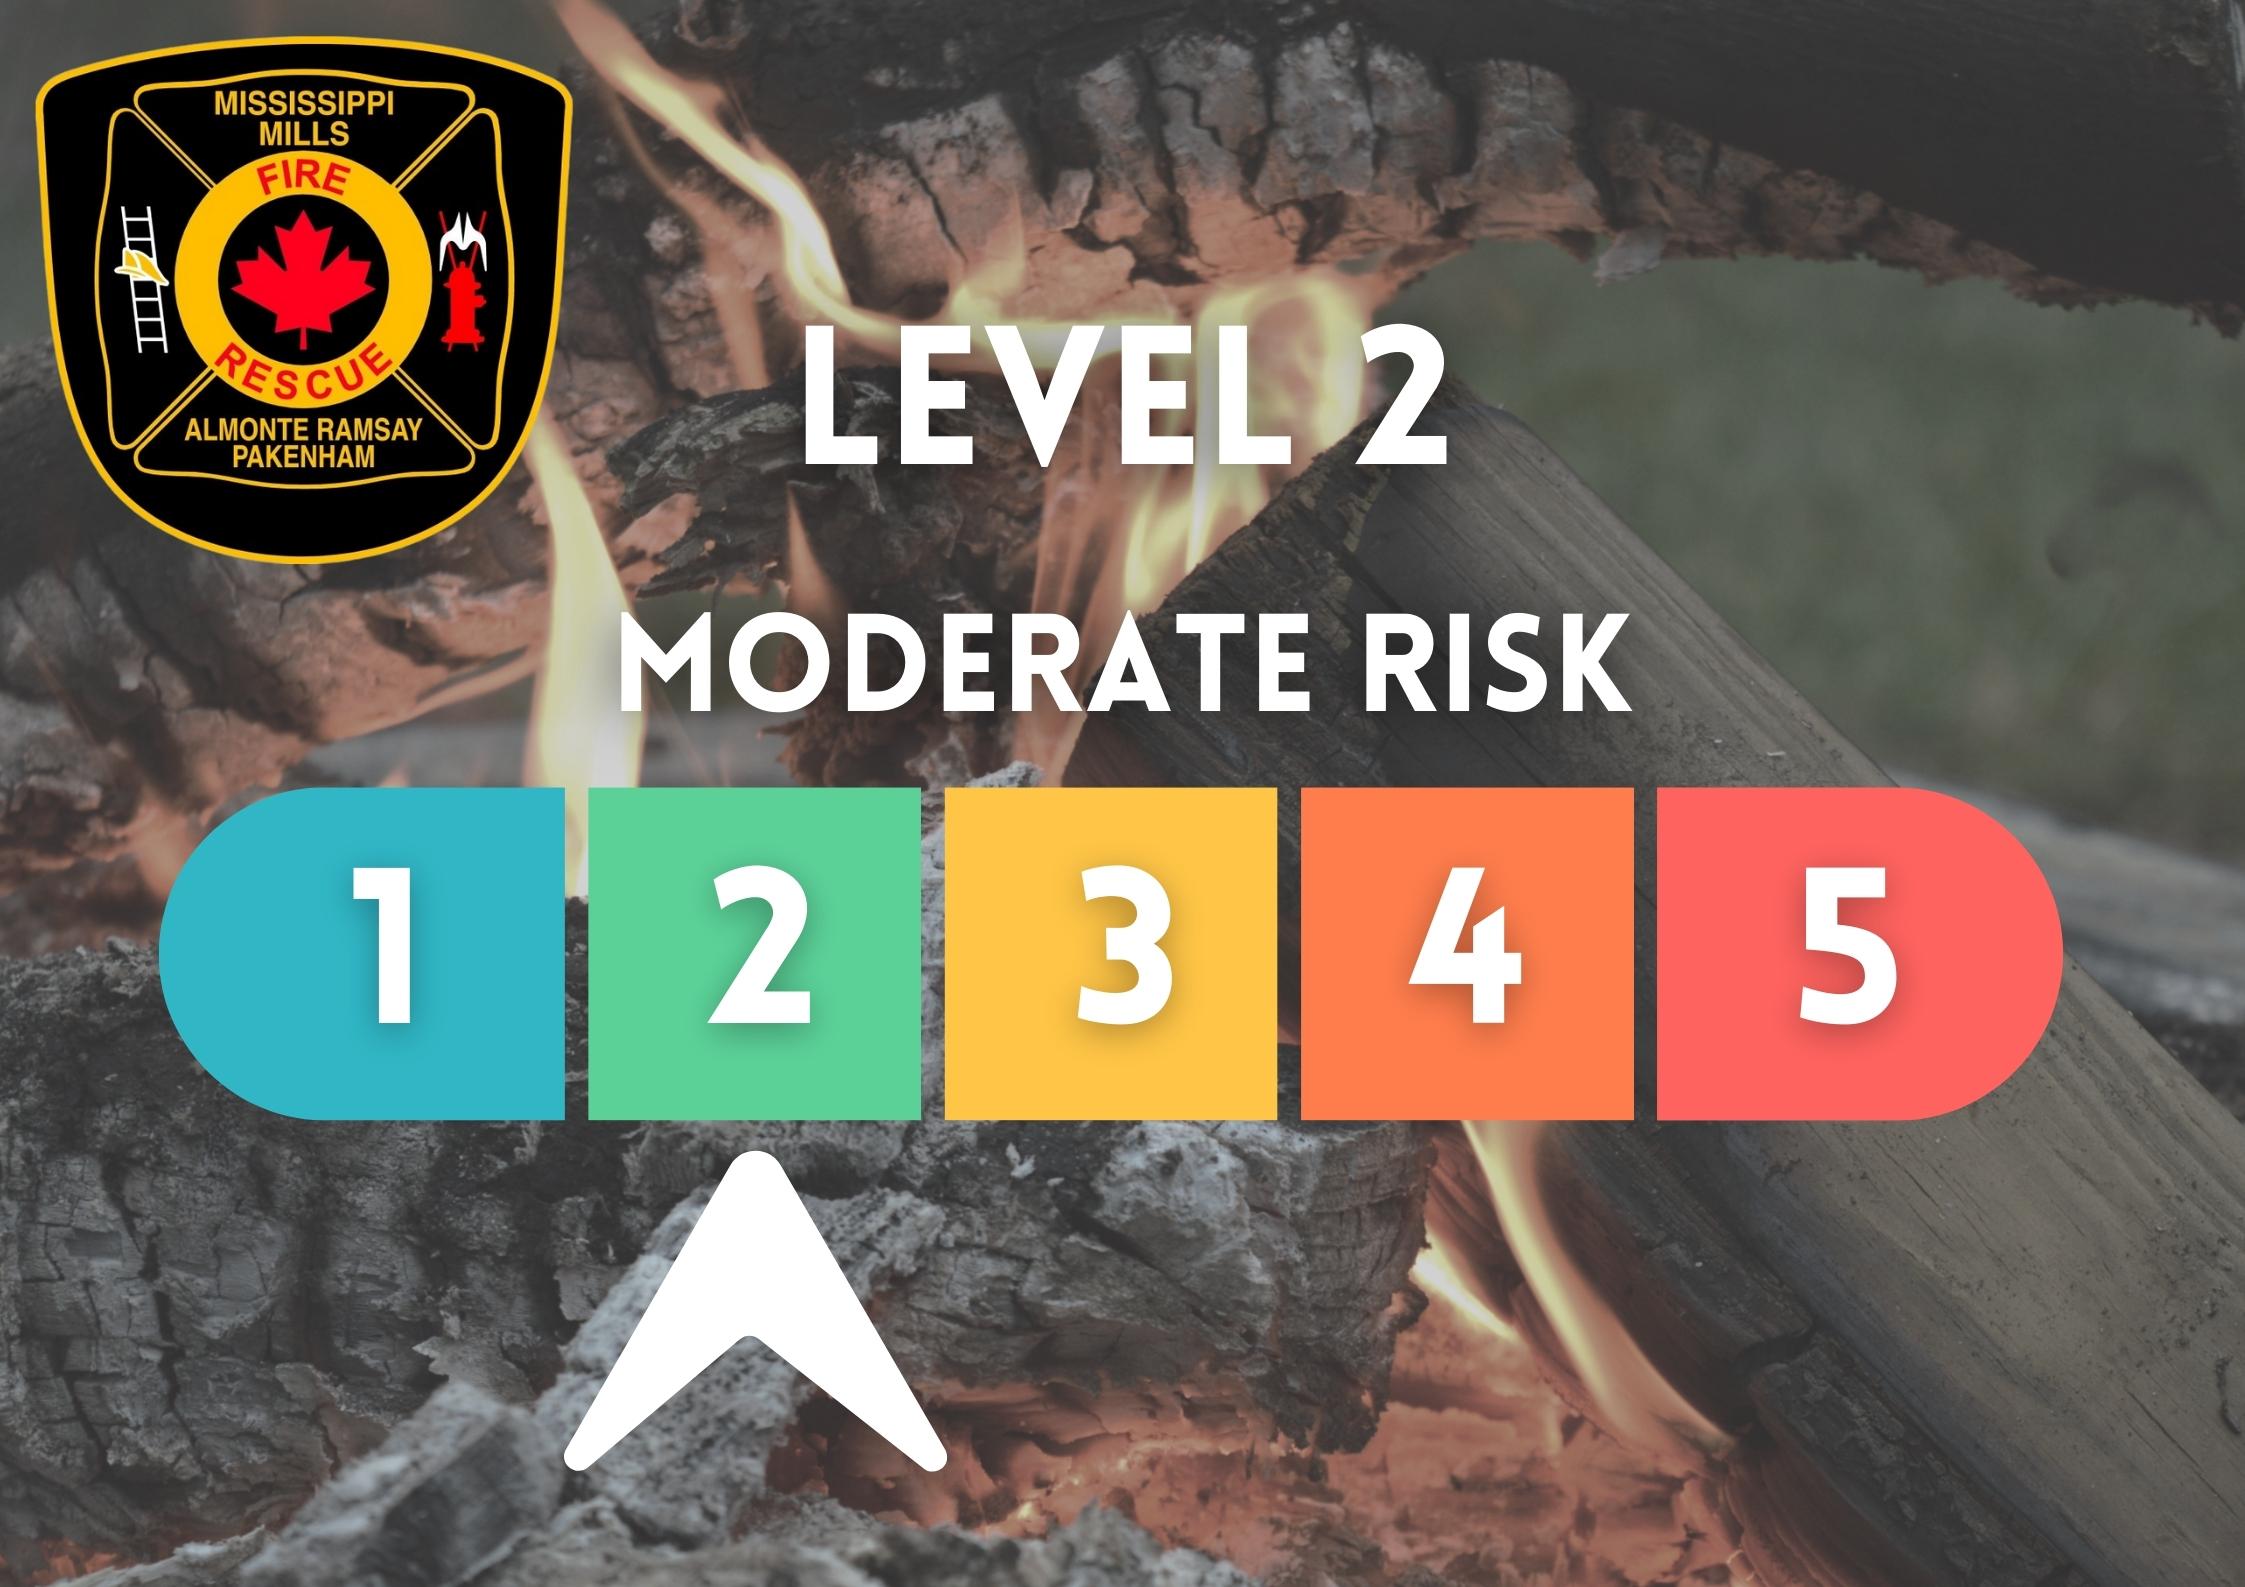 Mississippi Mills Fire Department Fire Risk Level 2 graphic